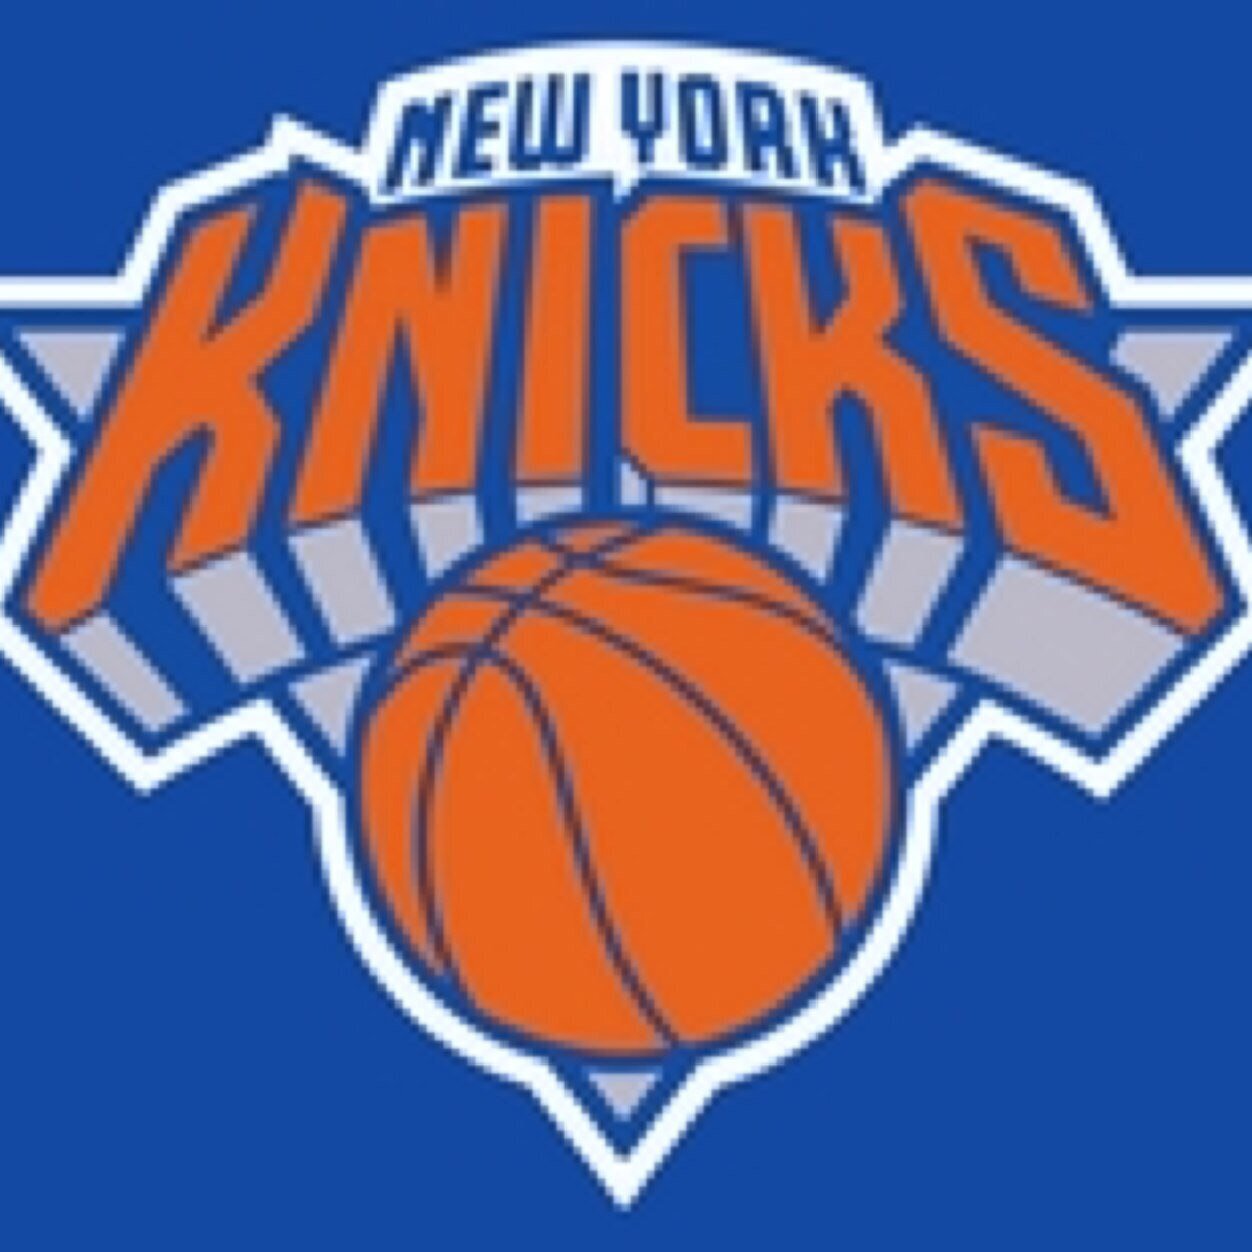 Knicks Blogger for the site owned and operated solely by the fans of WFan